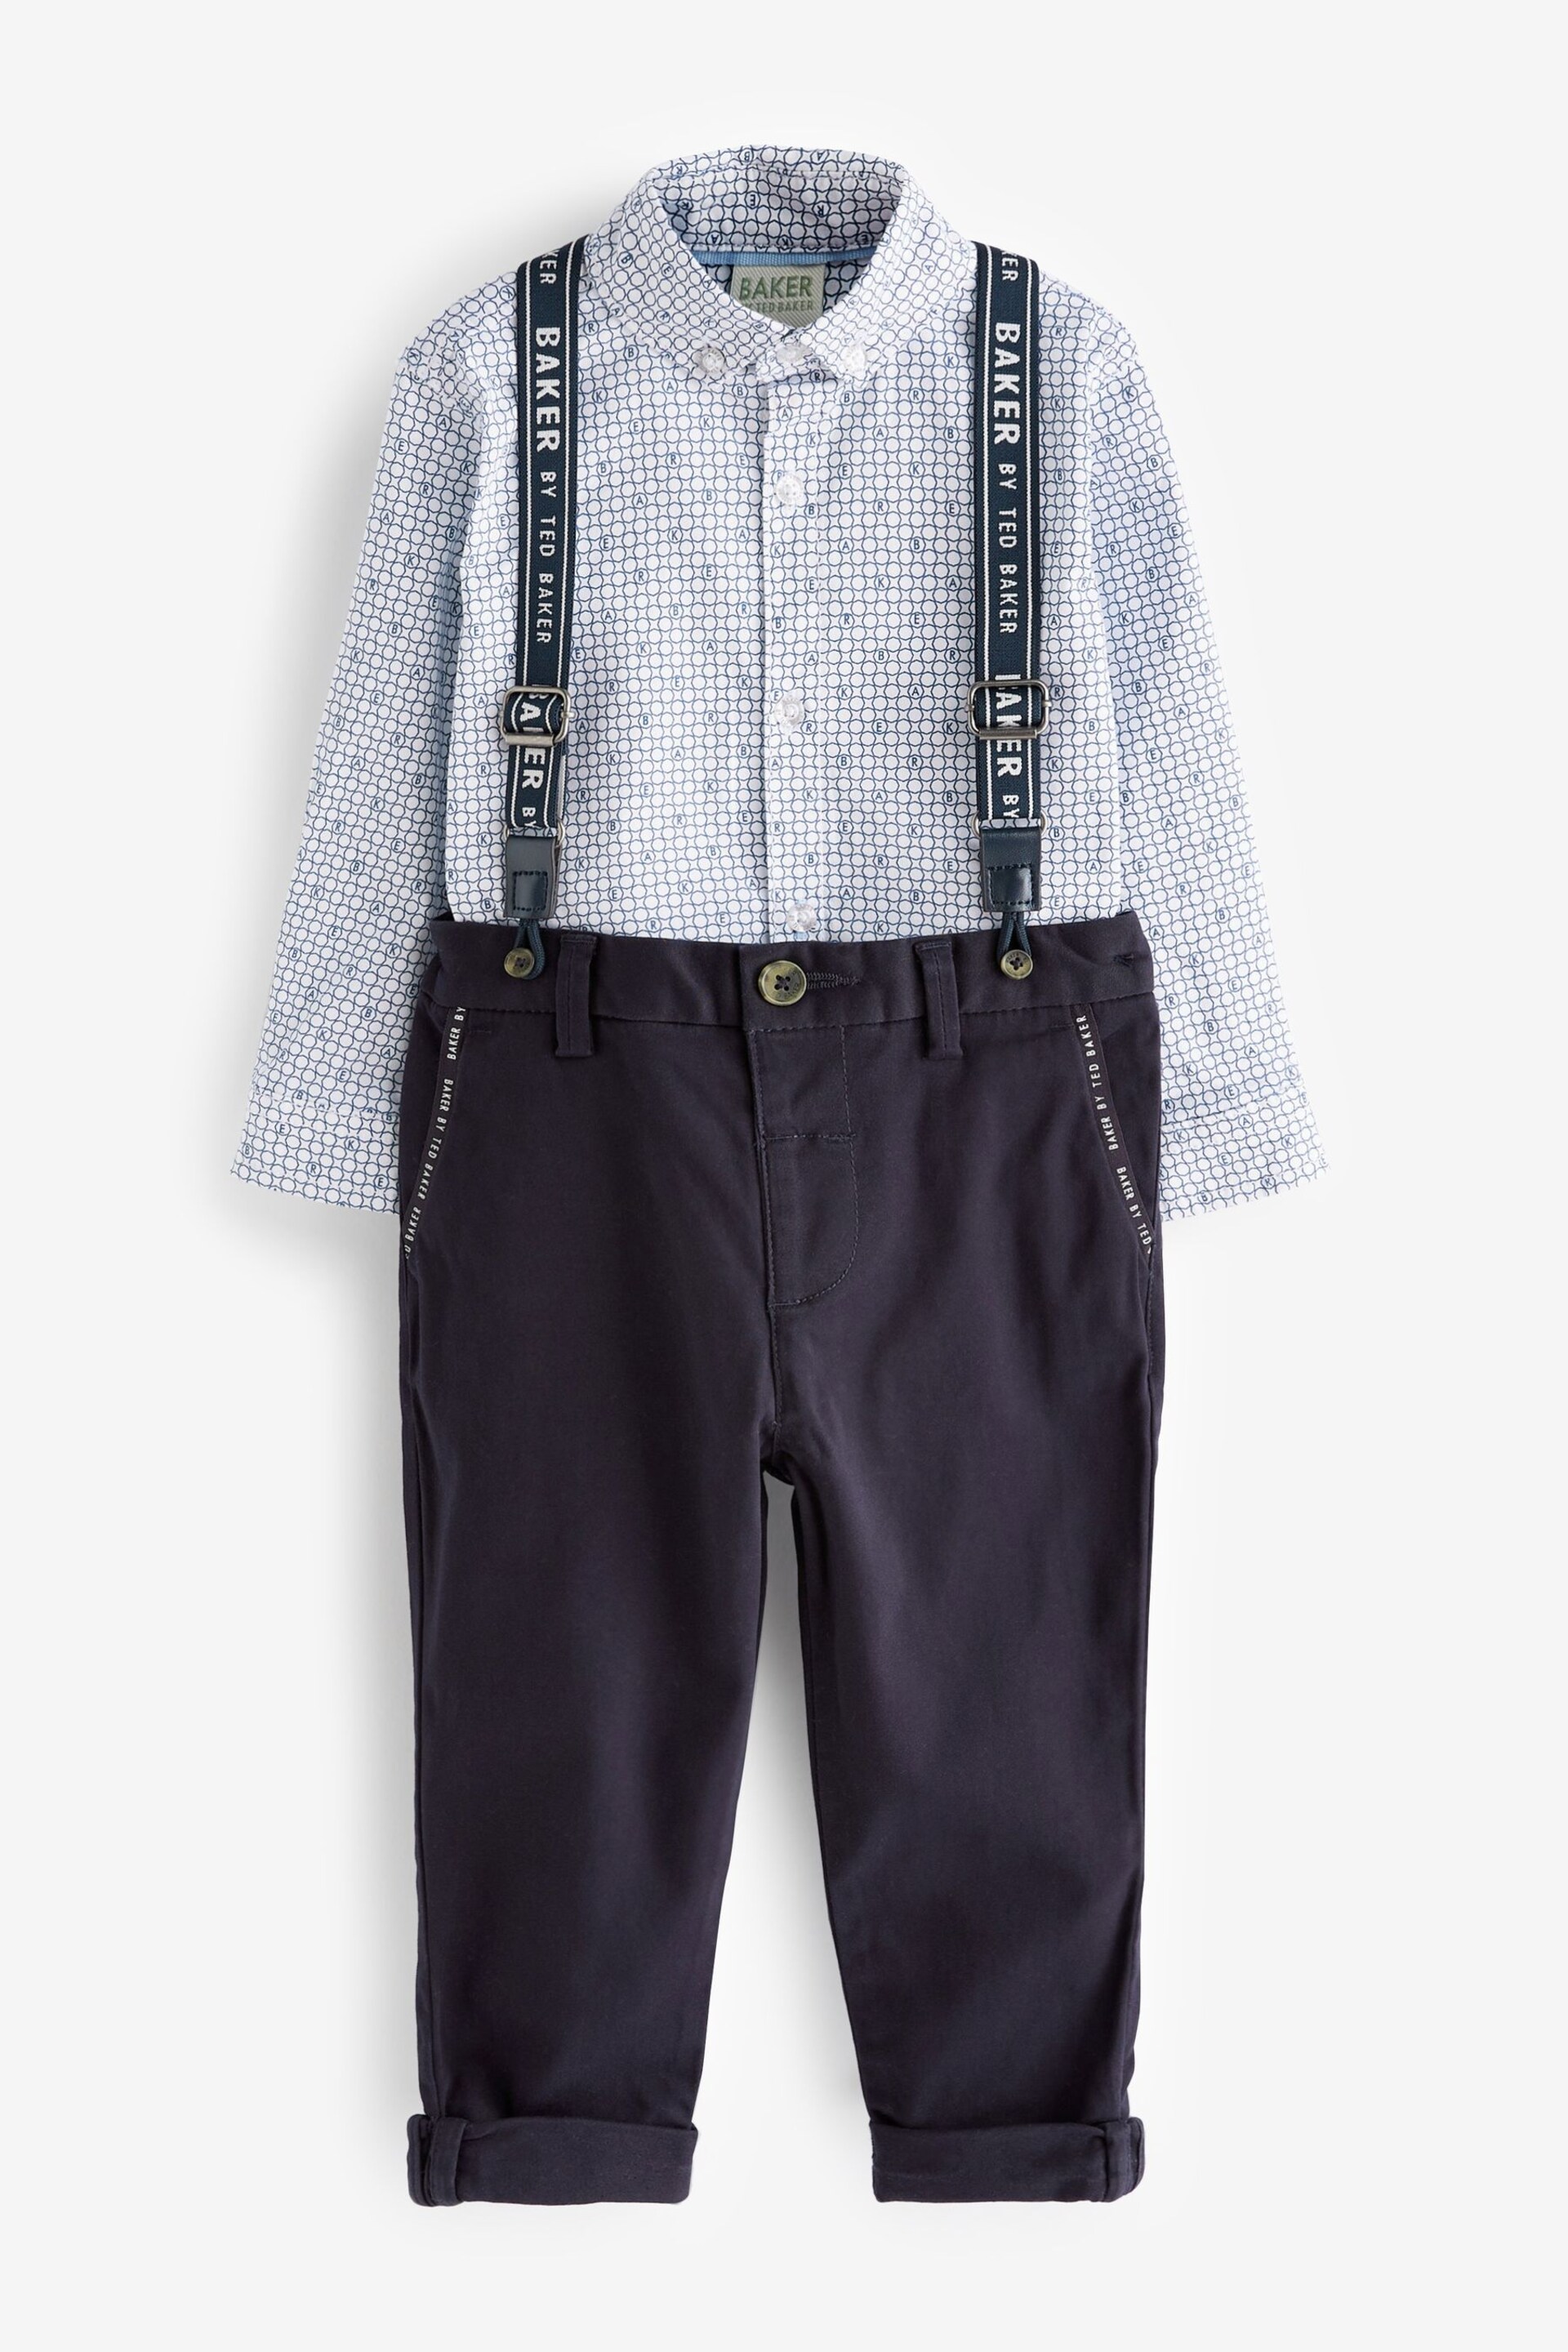 Baker by Ted Baker (3mths-6yrs) Shirt, Braces and Chino Set - Image 9 of 14